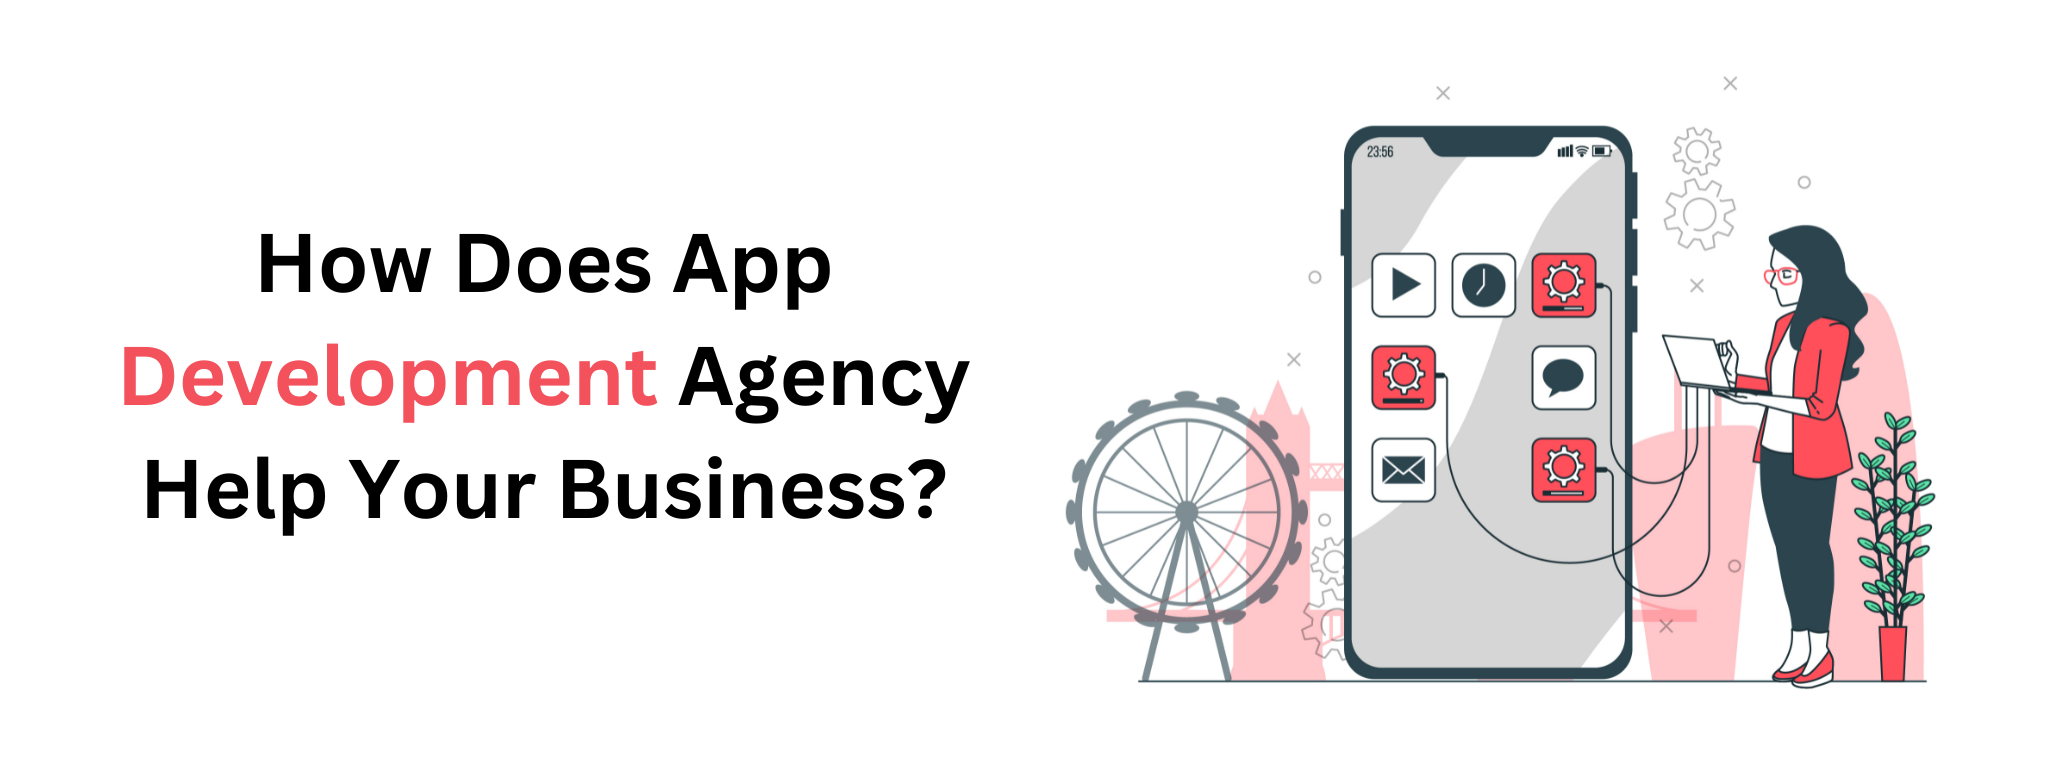 How Does App Development Agency Help Your Business?